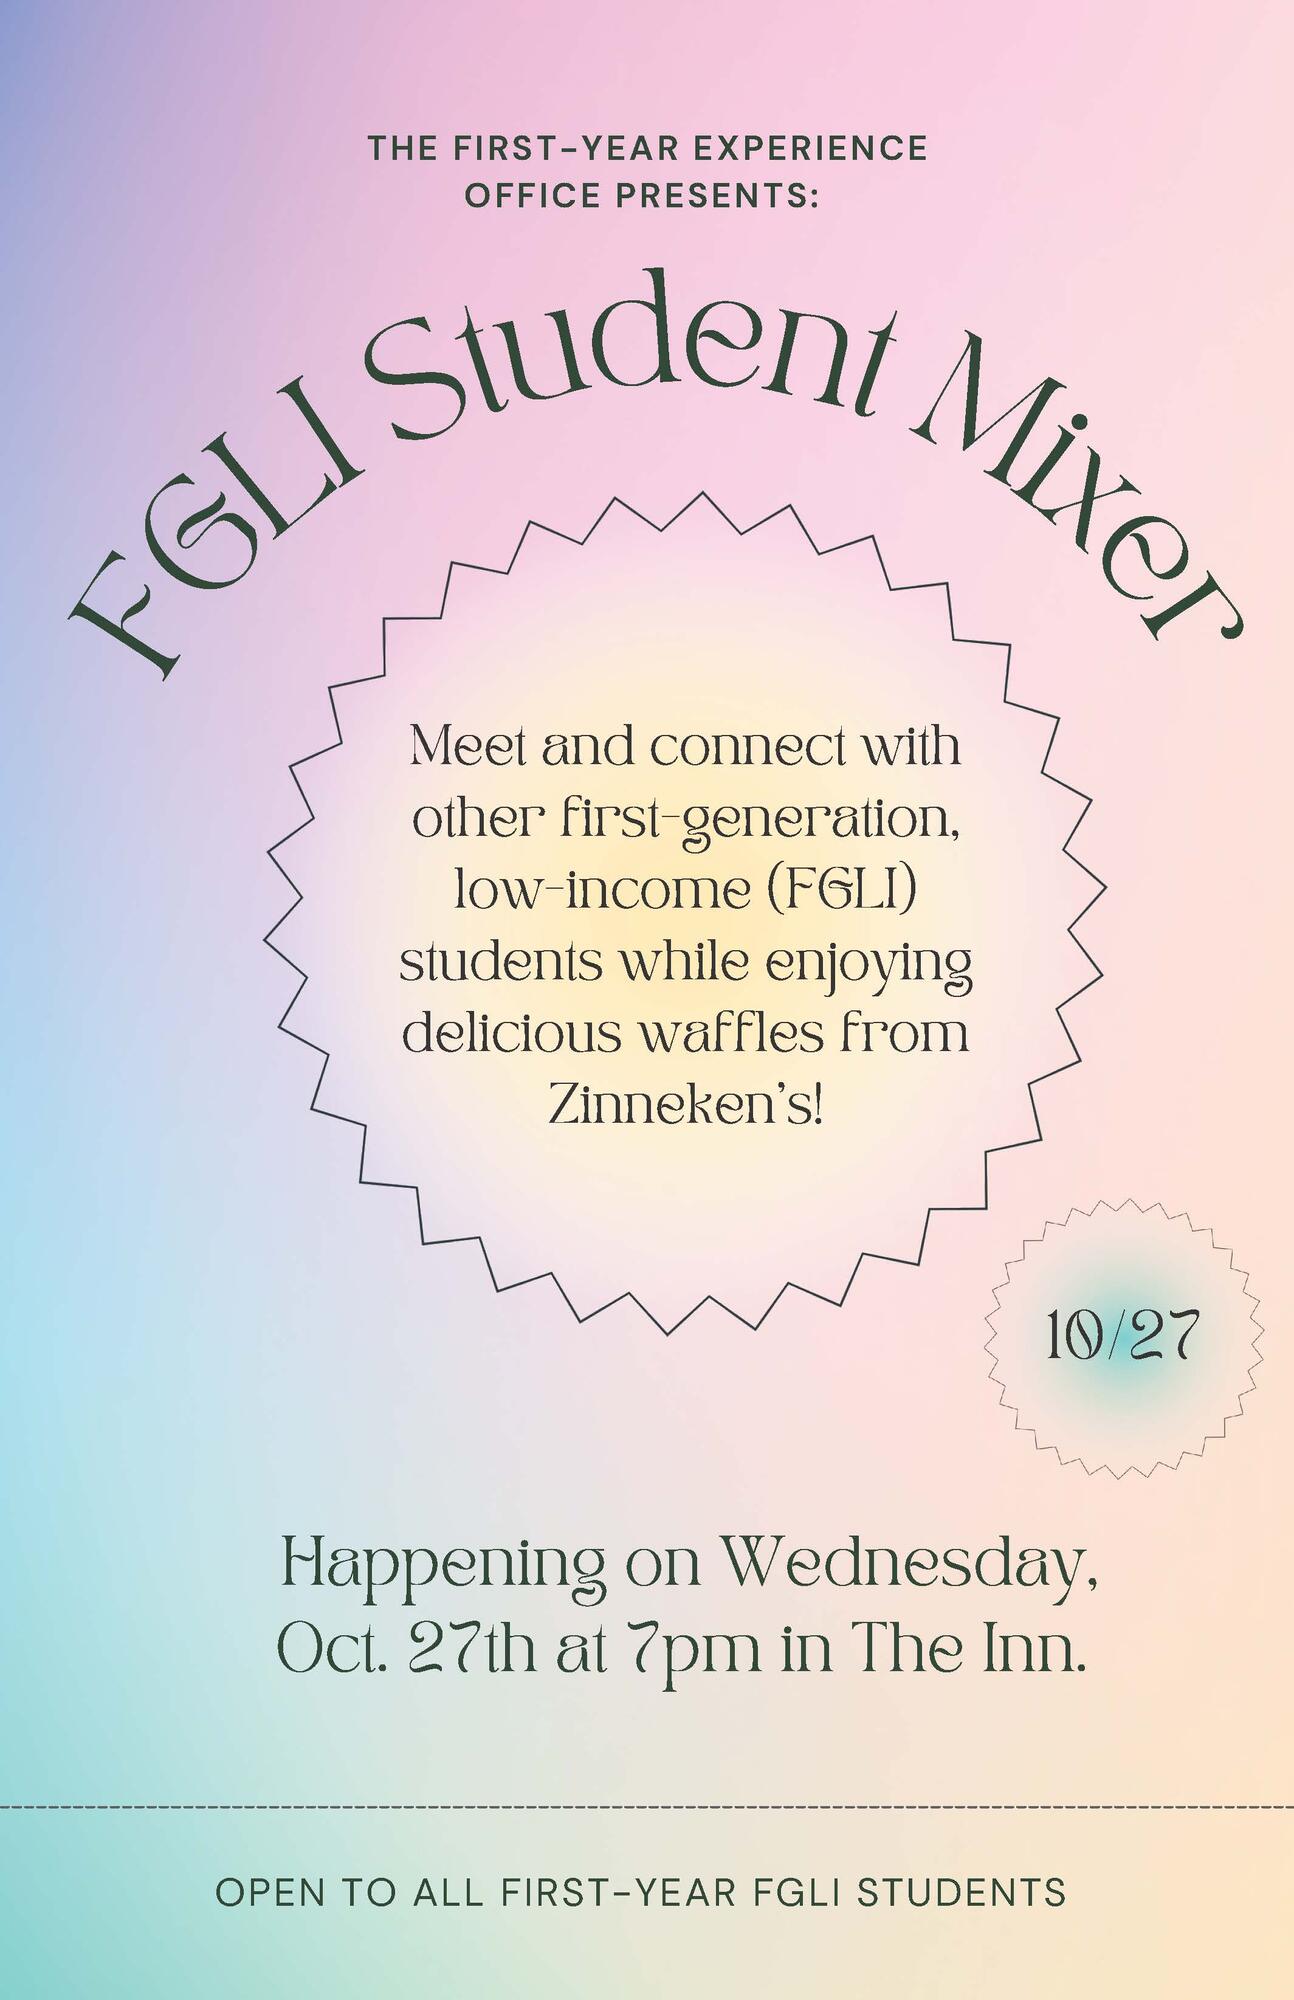 FGLI student mixer for first-year students